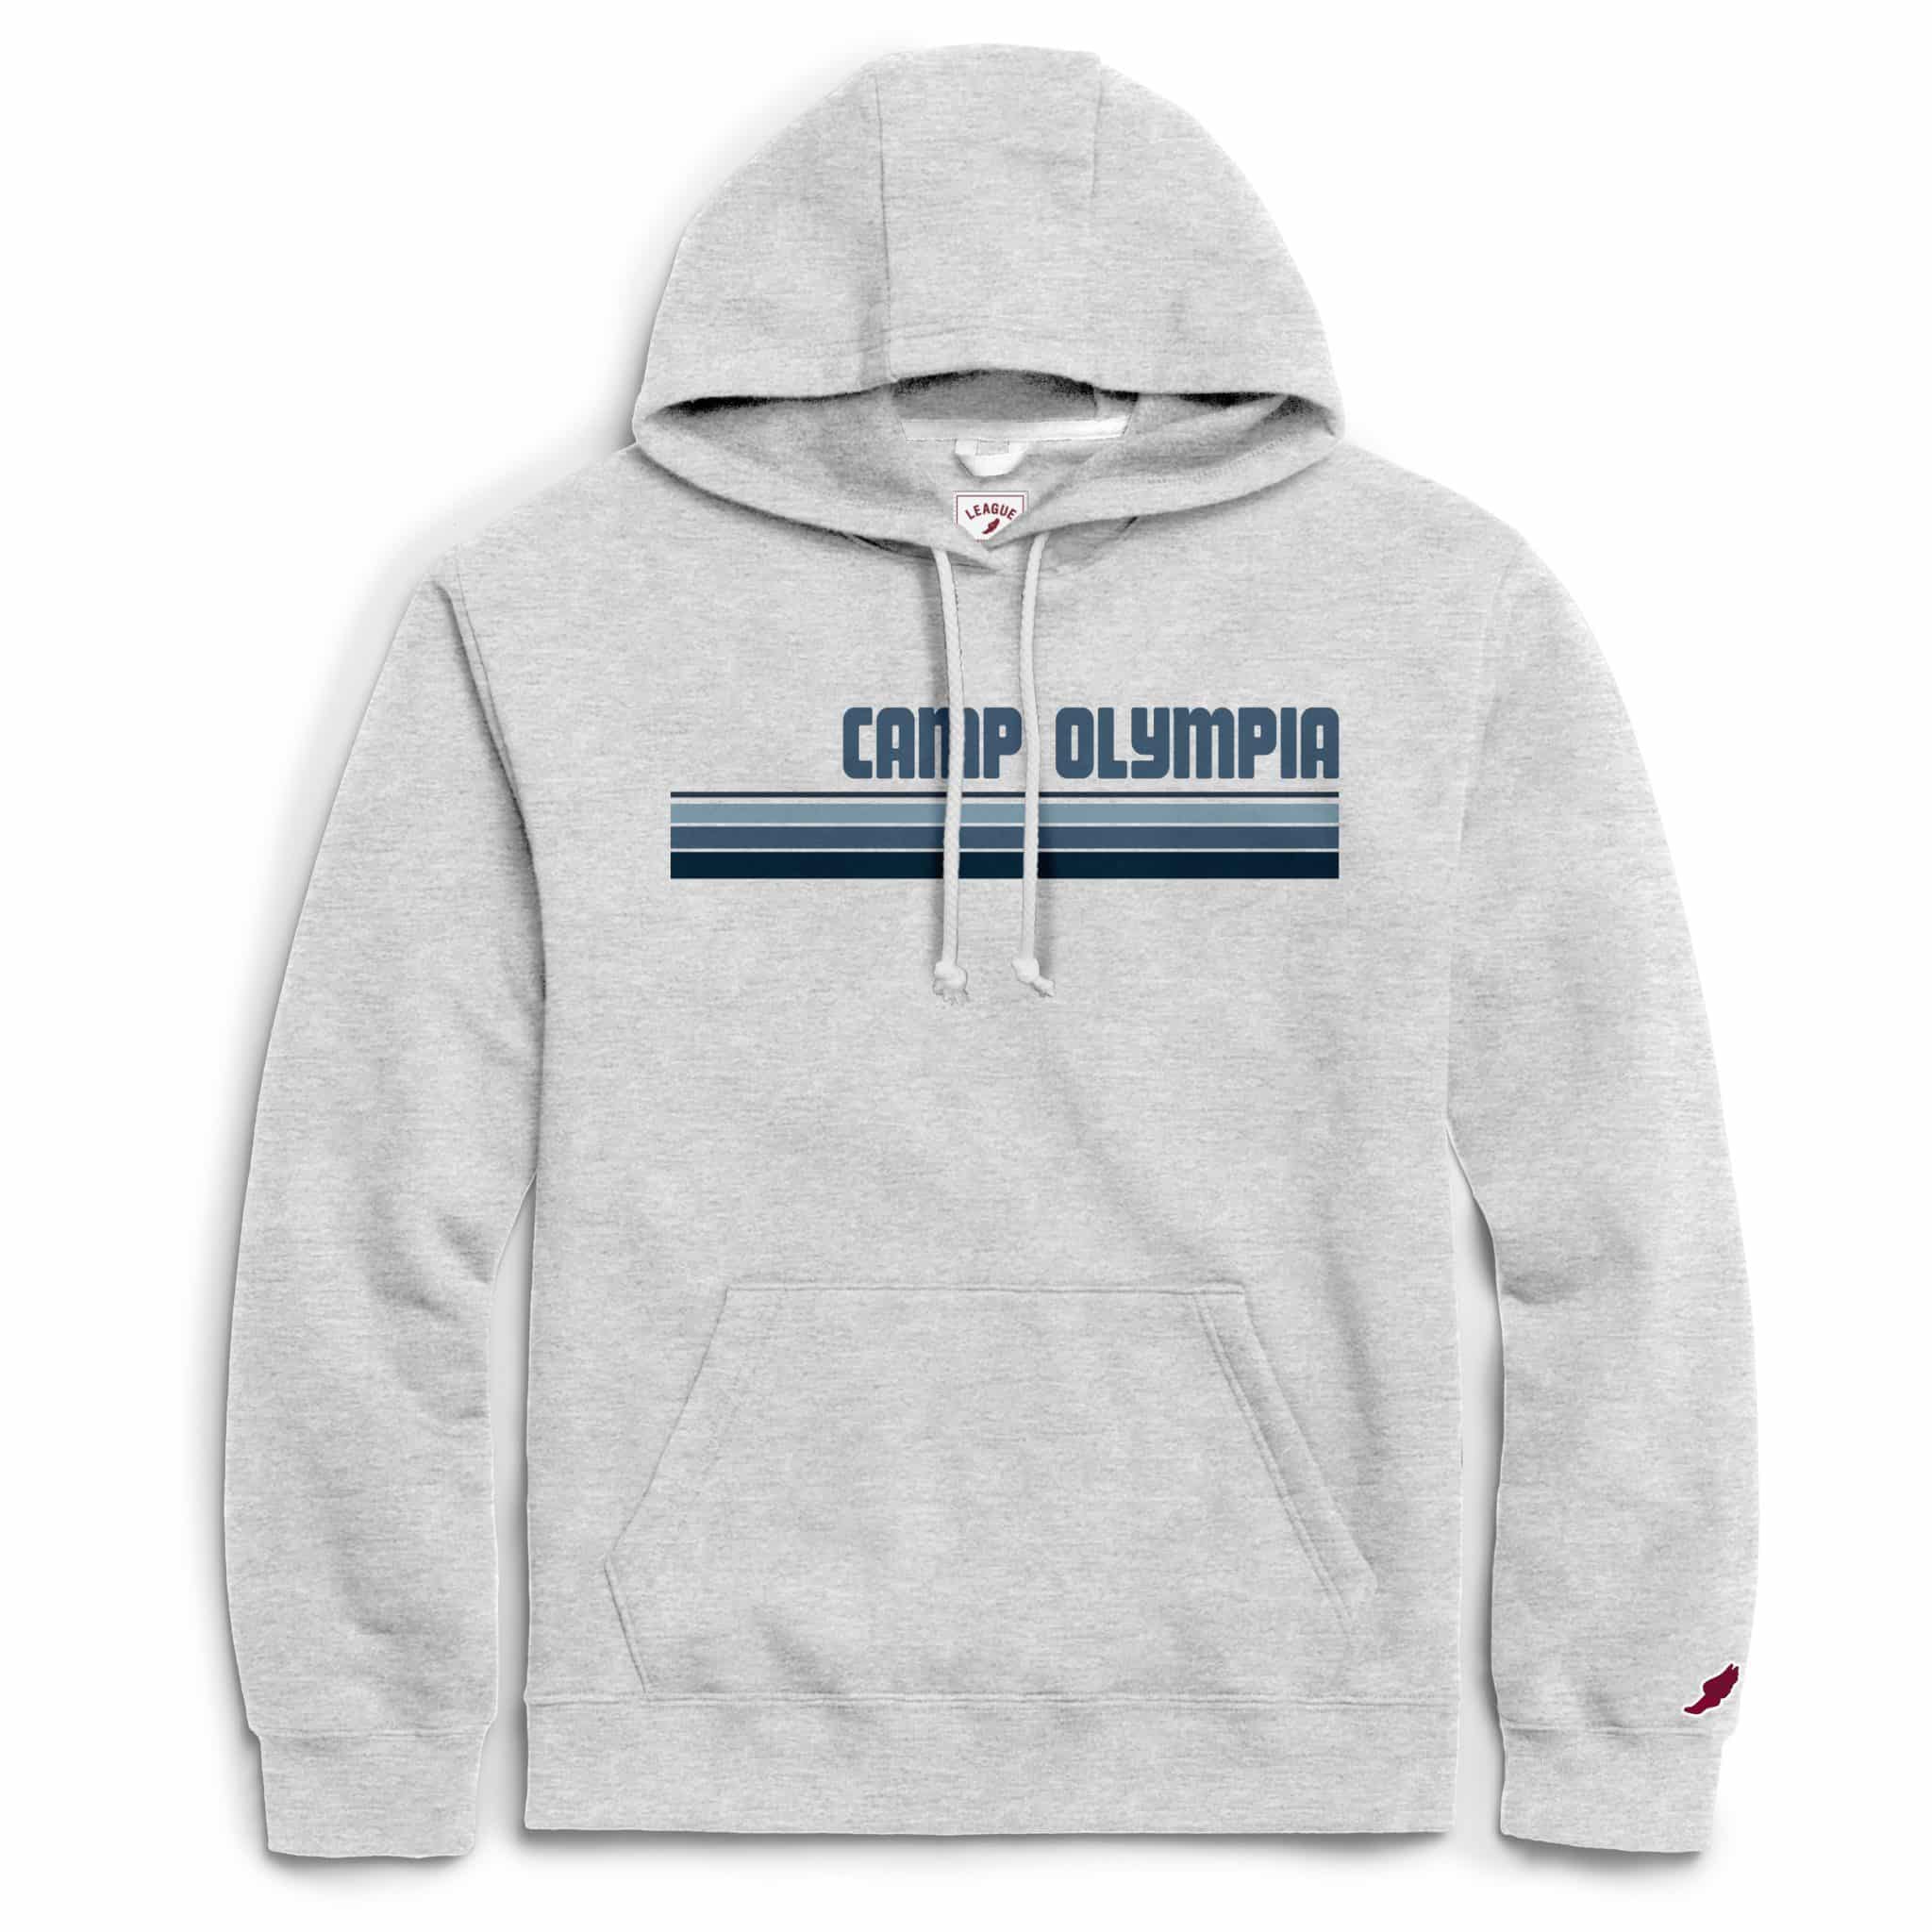 Striped Design Hoodie - Oxford - Camp Olympia